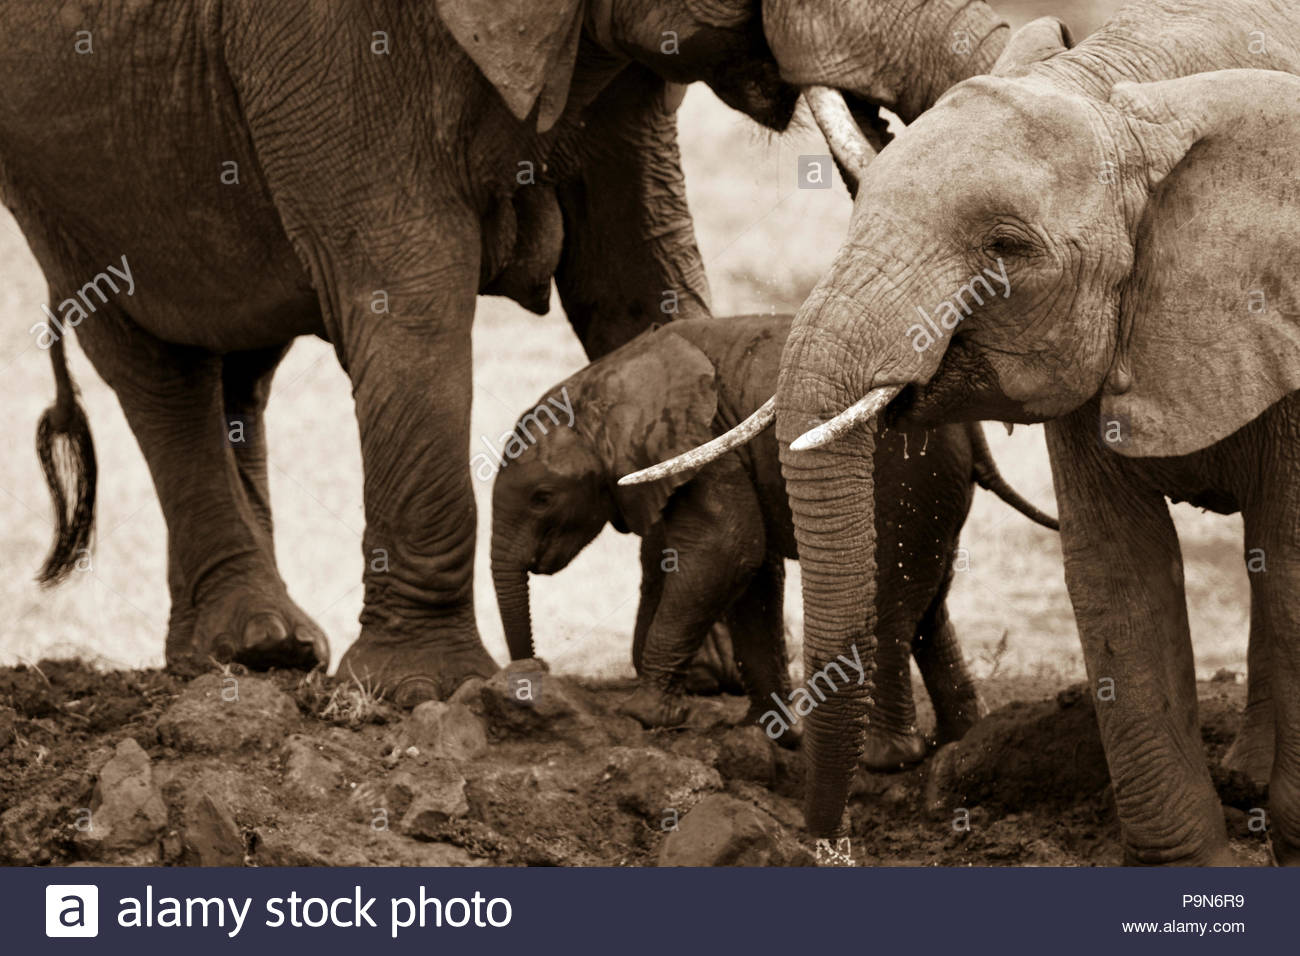 Adult, baby, and juvenile African elephants. Stock Photo